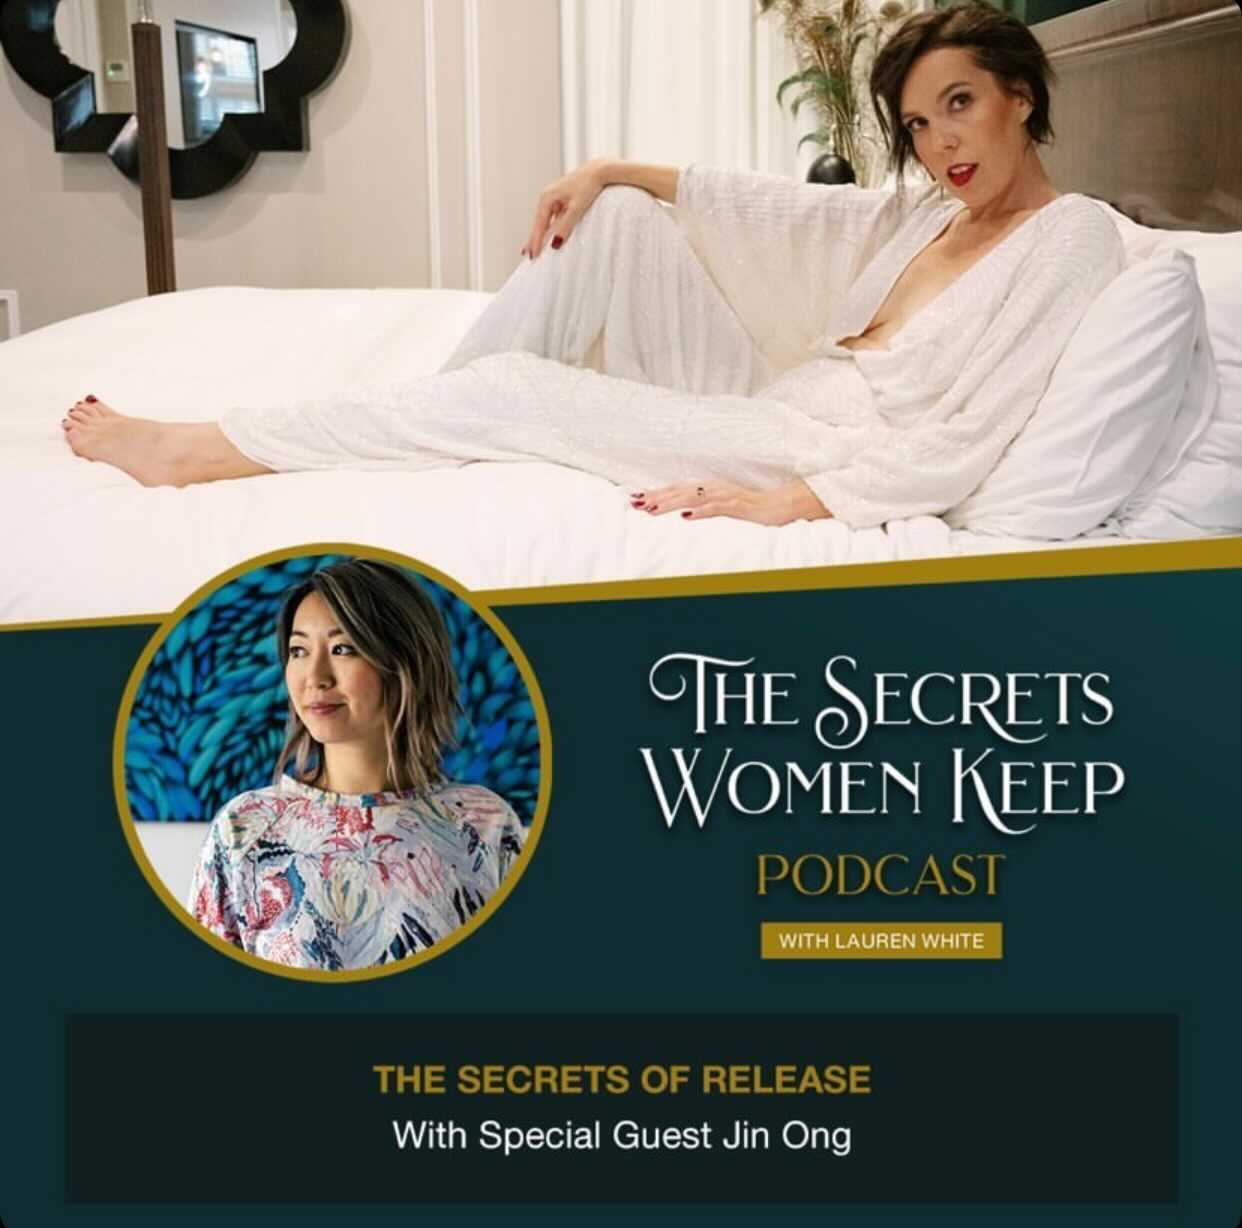 dr jin ong on the lauren white podcast the secrets women keep